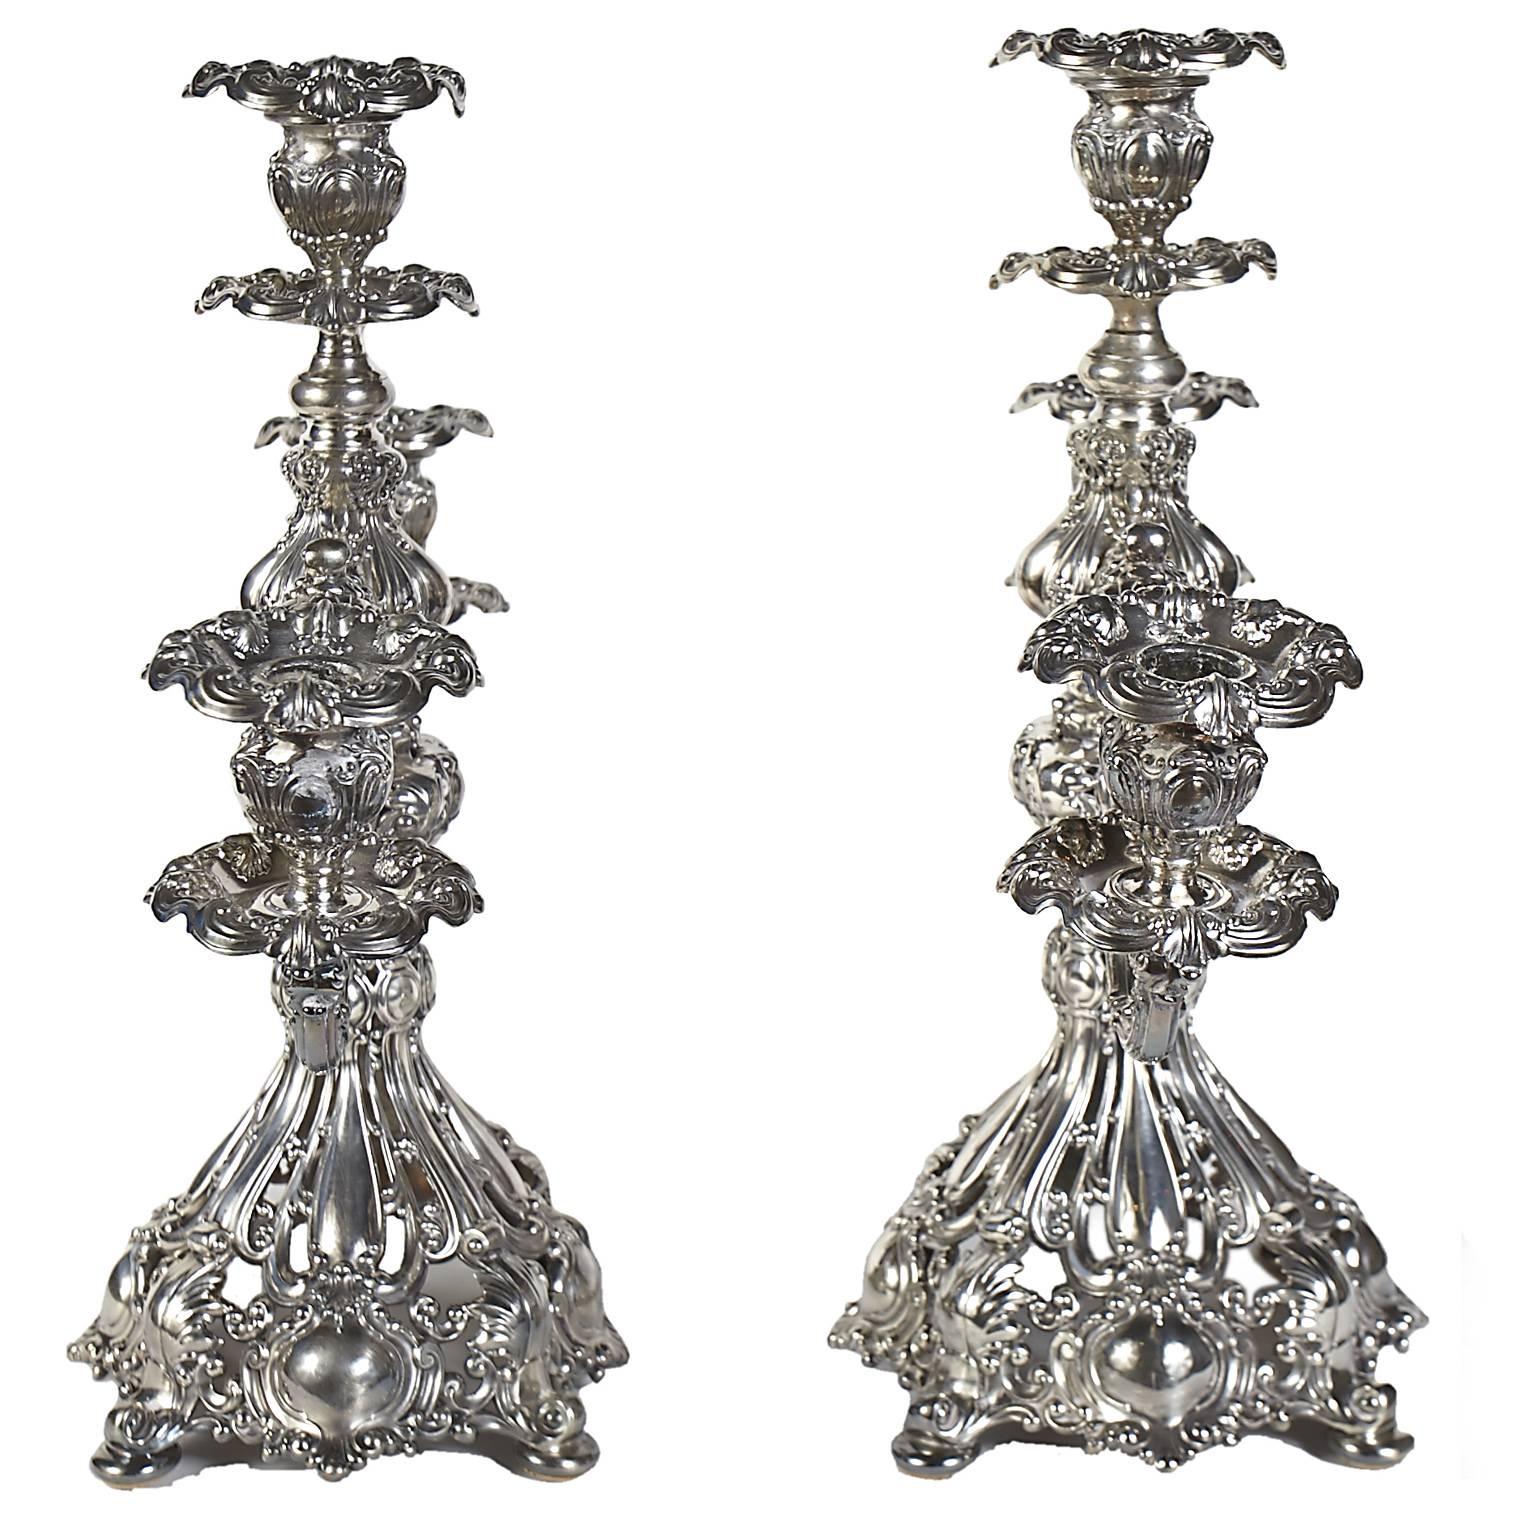 Victorian Late 19th Century Silver Plate Reed and Barton Candelabras 